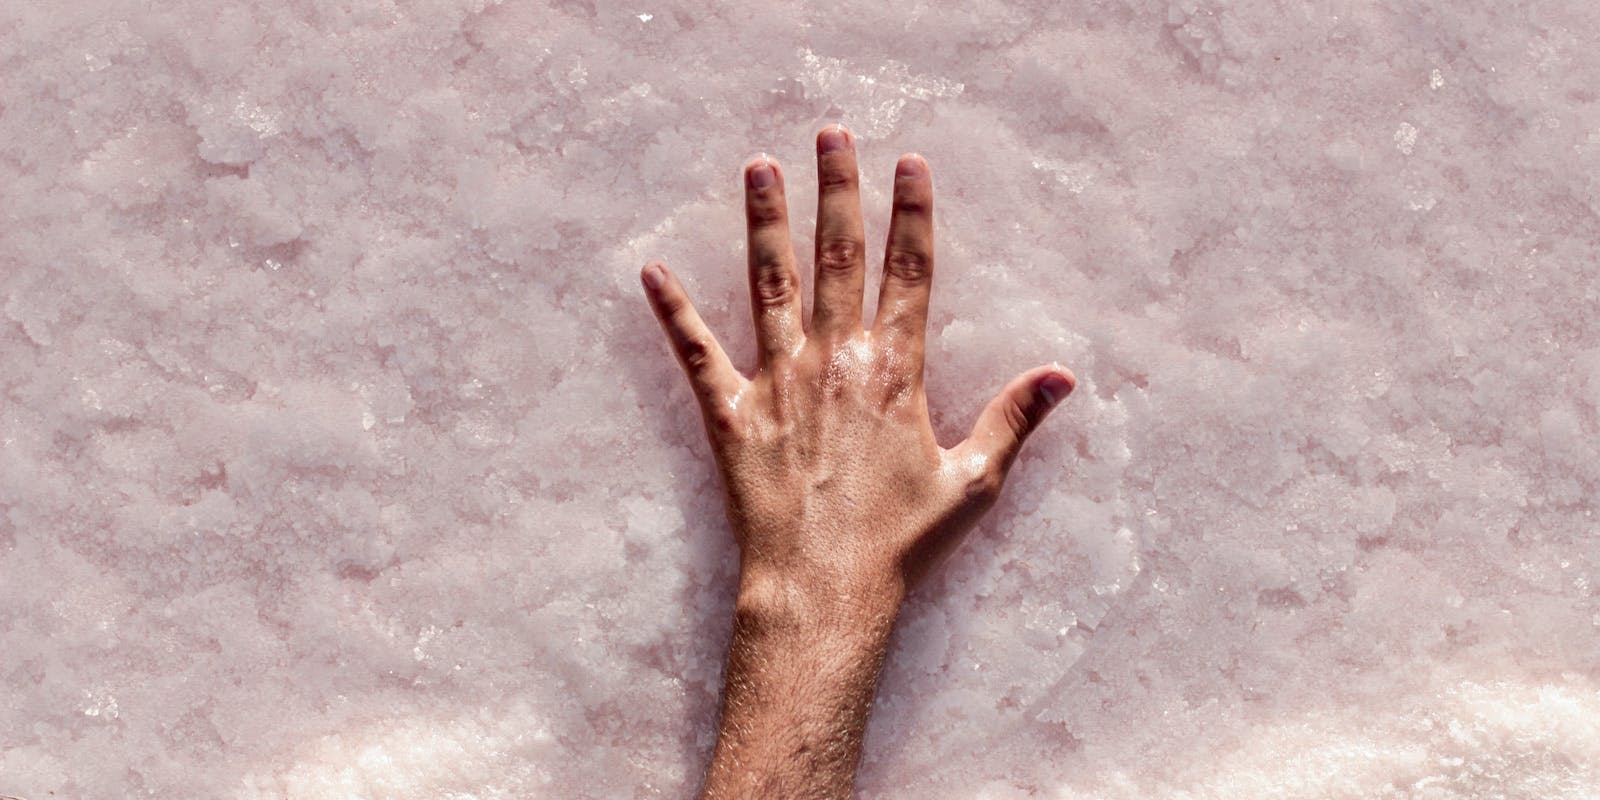 A glossy hand stretches out on a bed of wet pink salt.